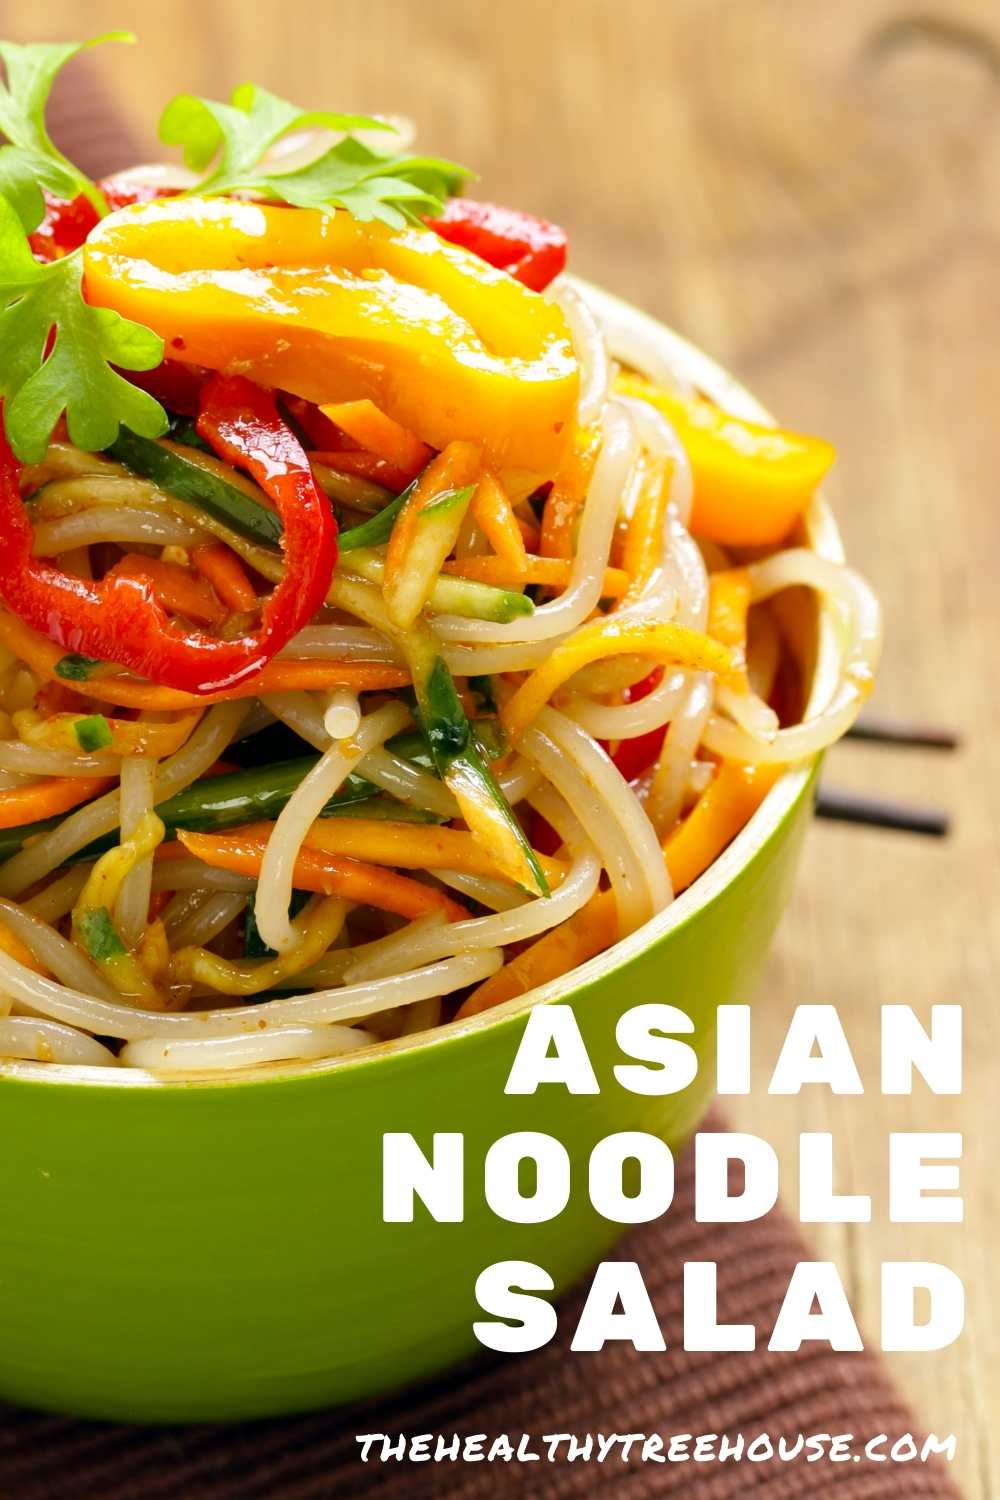 Gluten-Free Cold Asian Noodle Salad Recipe - The Healthy Treehouse